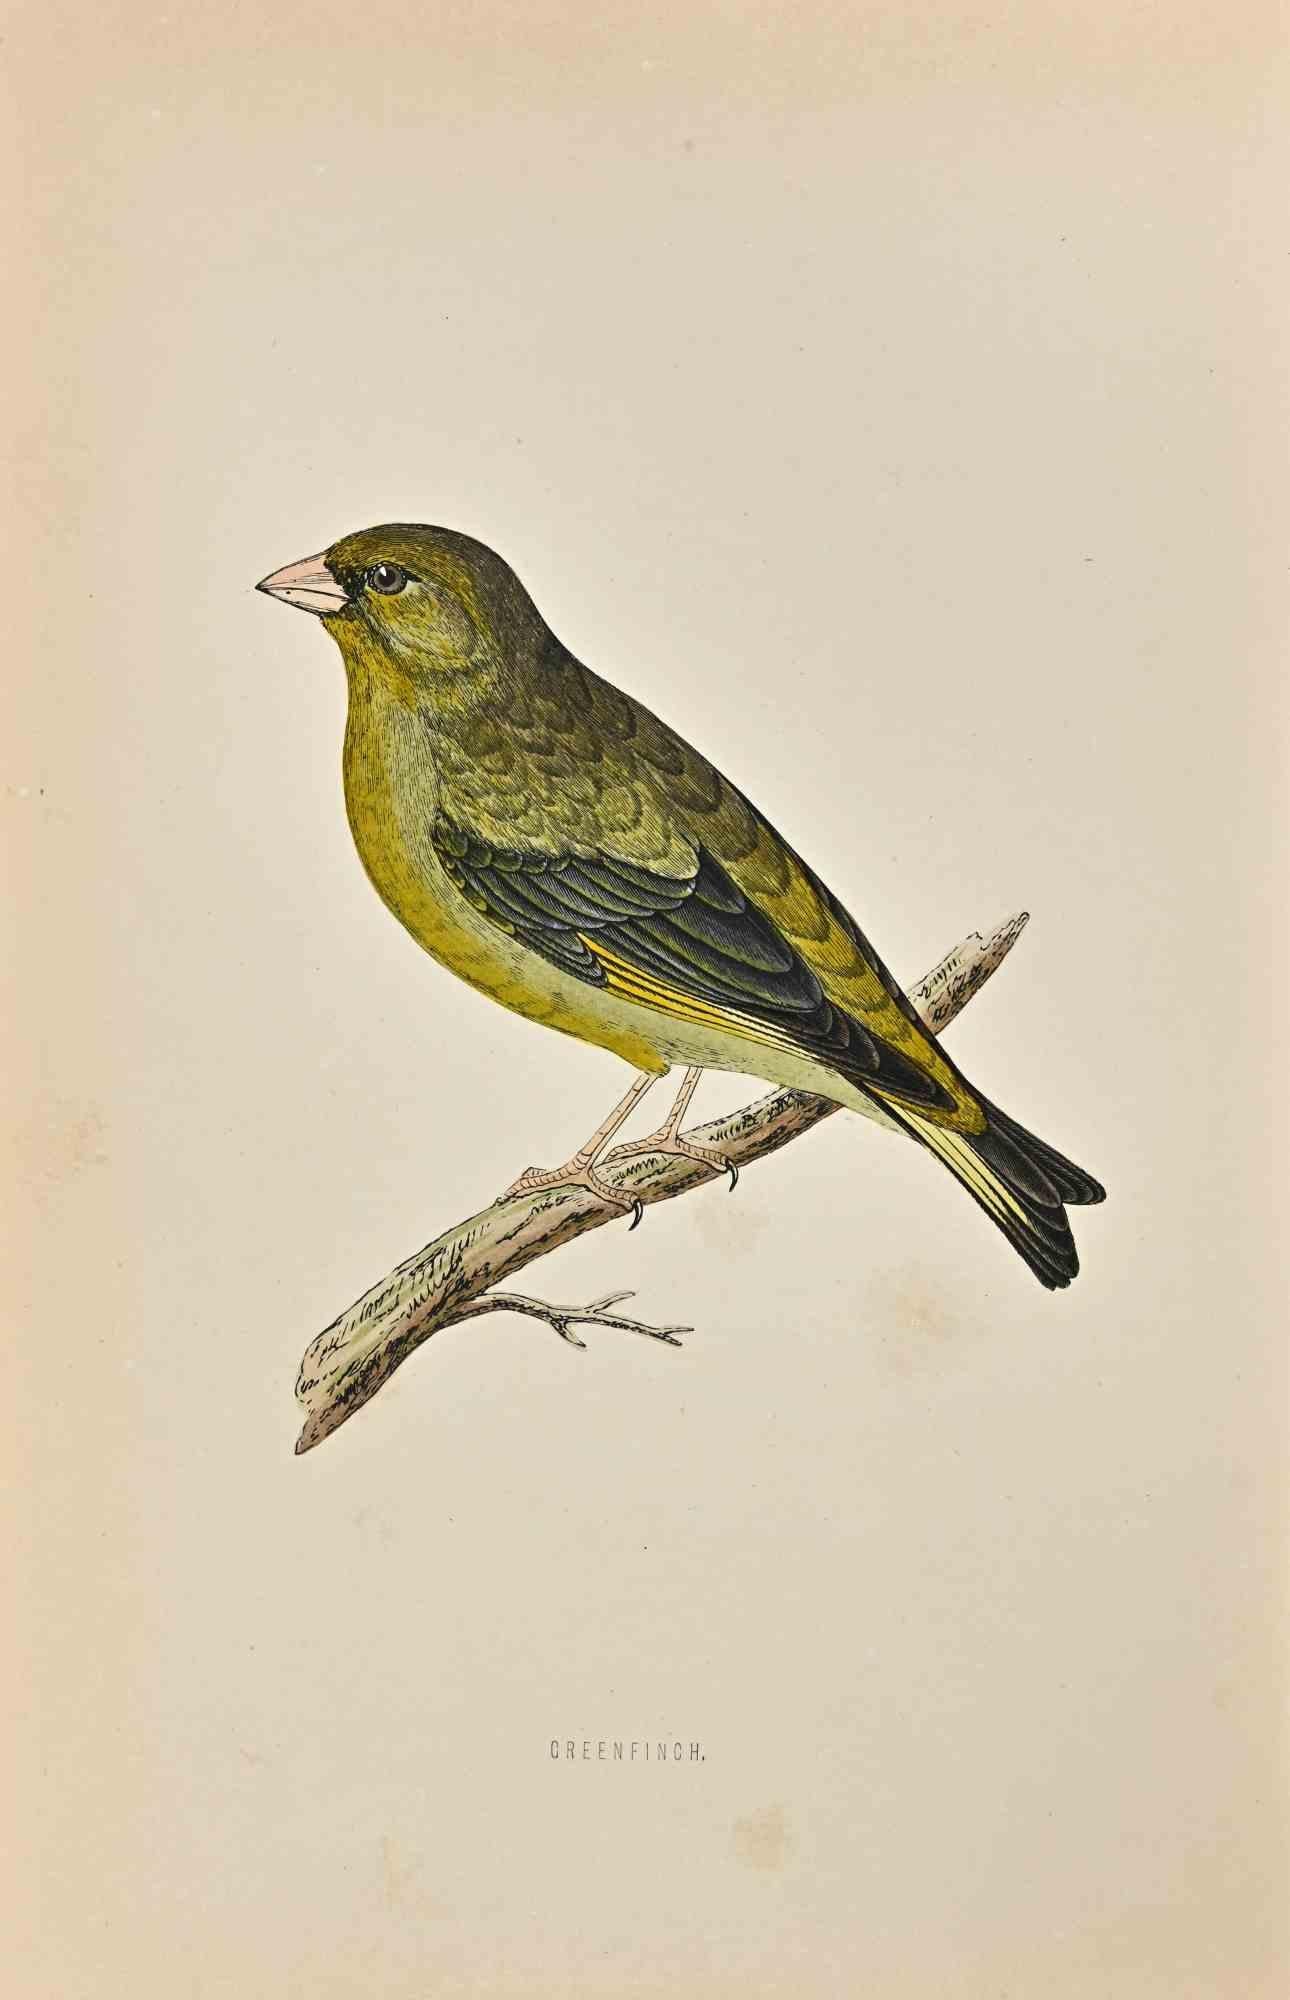 Greenfinch is  a modern artwork realized in 1870 by the British artist Alexander Francis Lydon (1836-1917) . 

Woodcut print, hand colored, published by London, Bell & Sons, 1870.  Name of the bird printed in plate. This work is part of a print